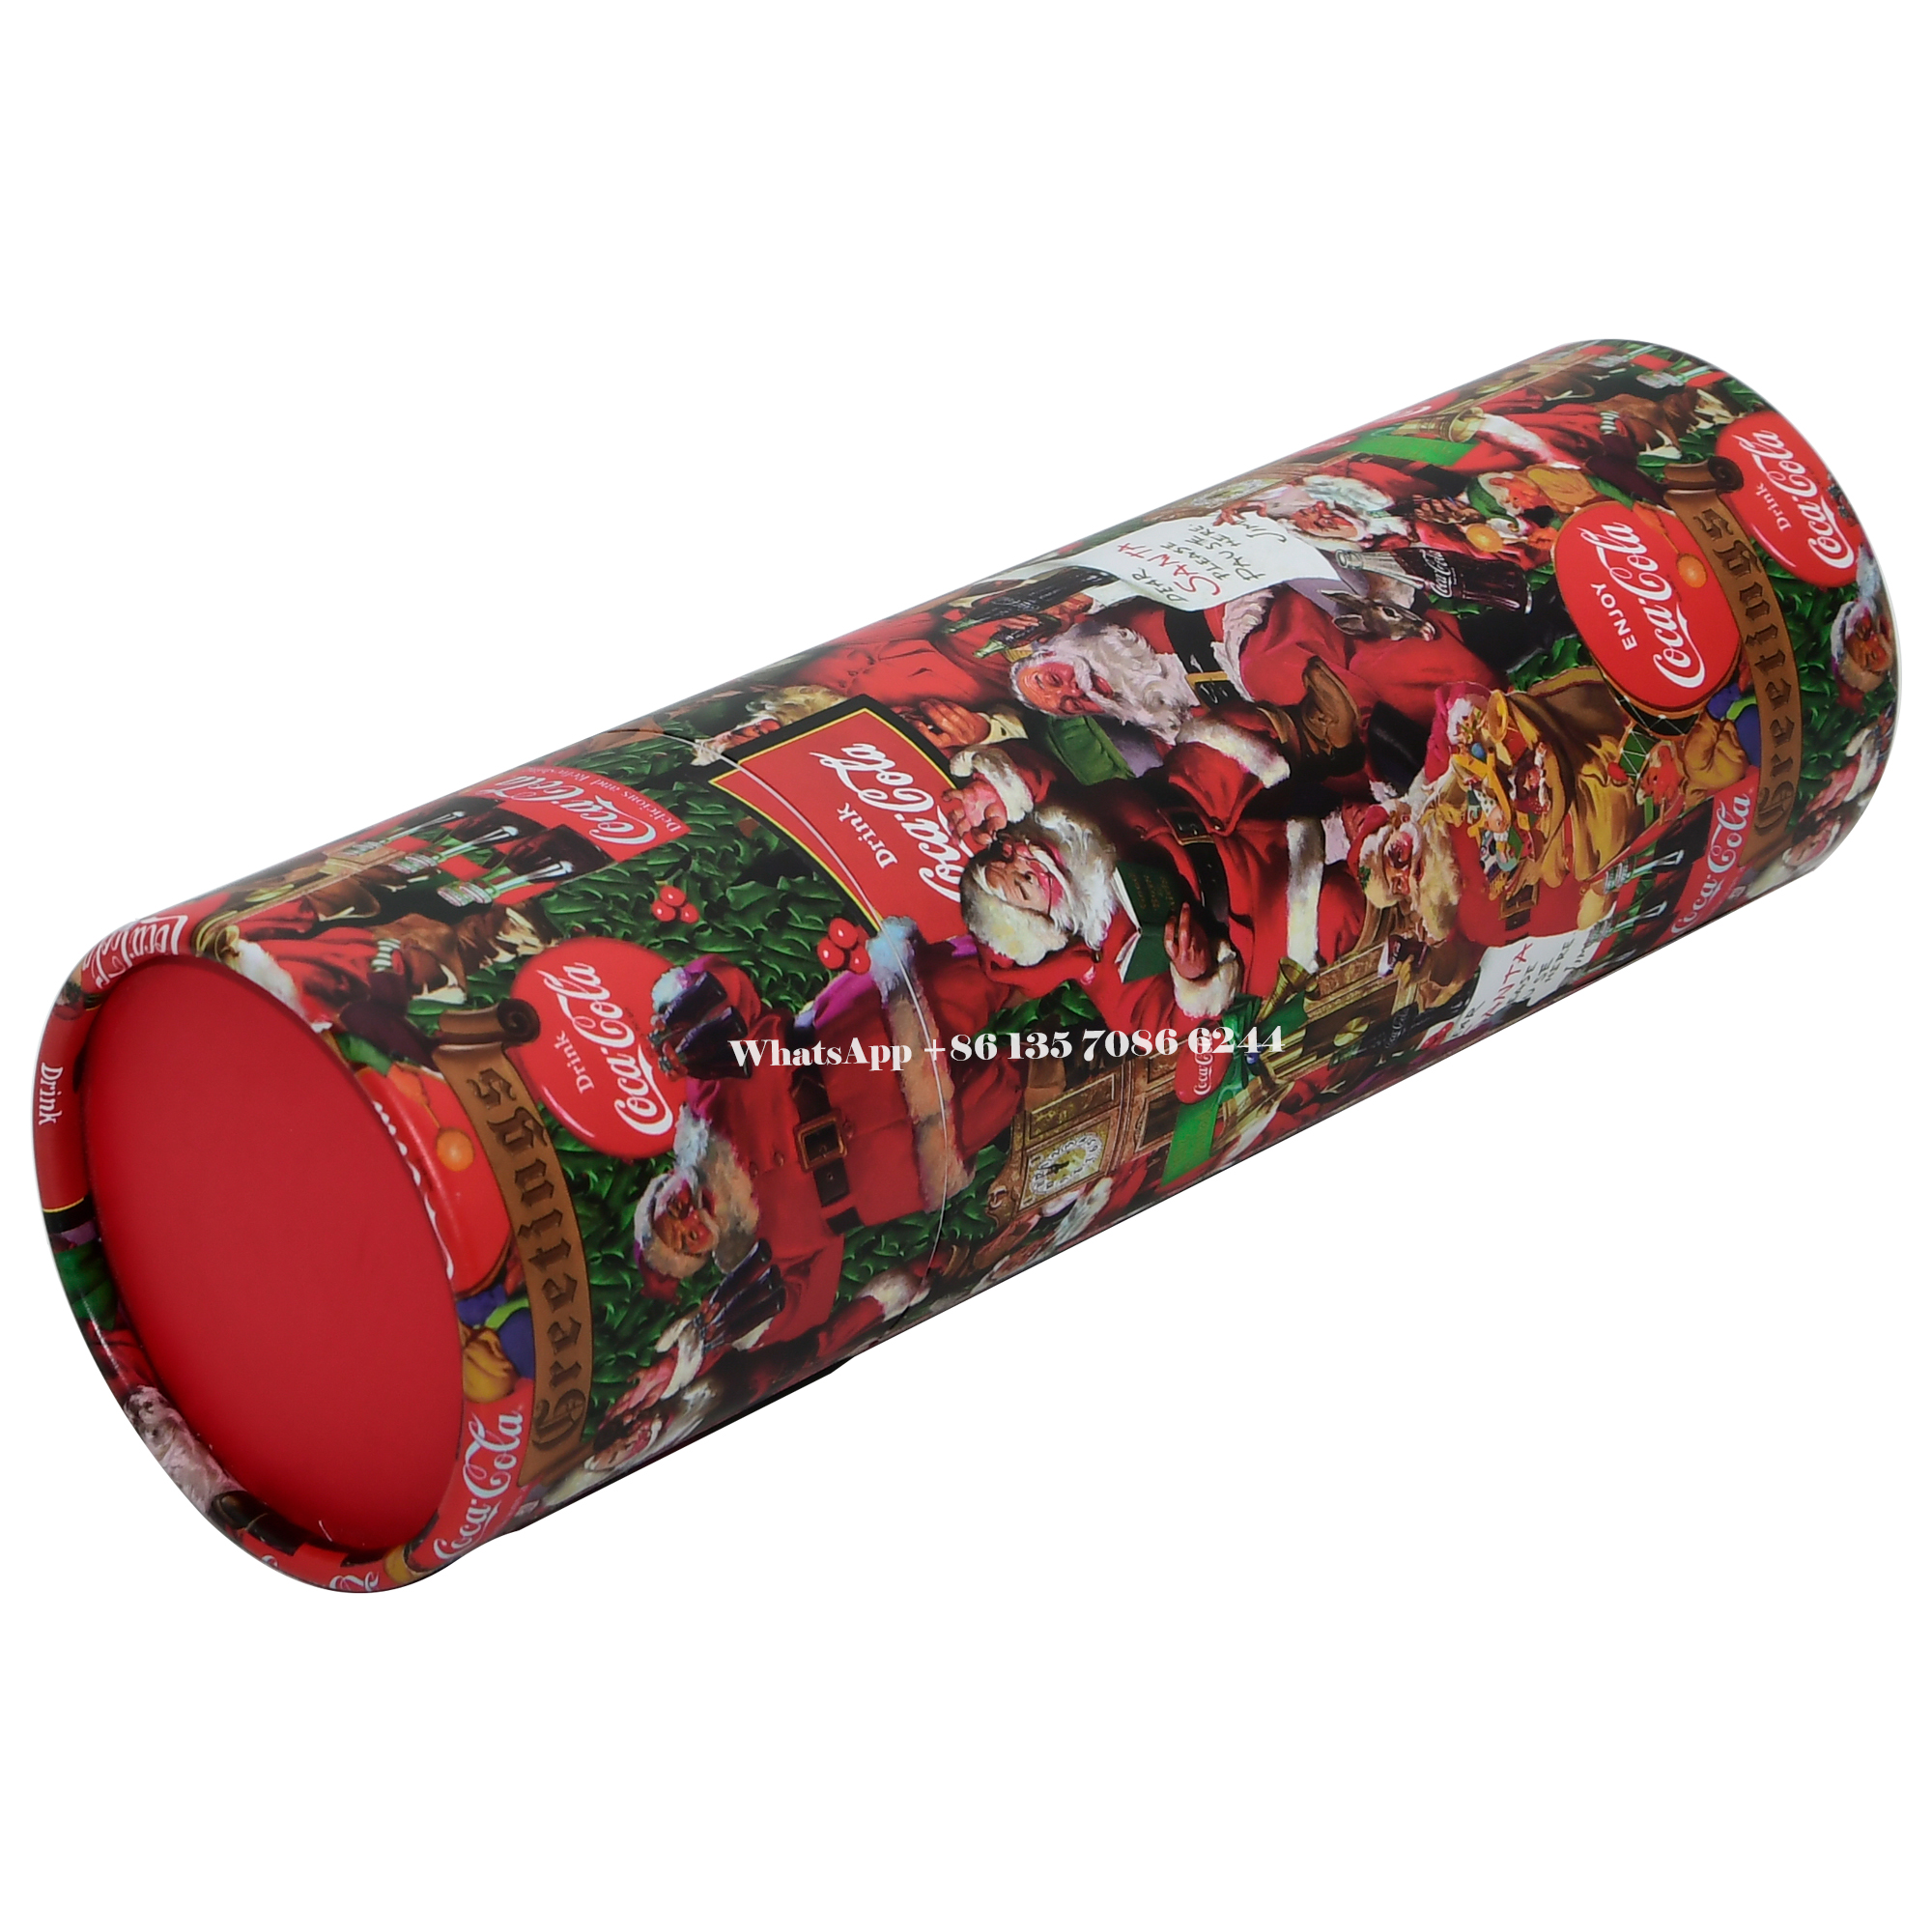 Festive Christmas Edition Coca-Cola Paper Tube Packaging Box  